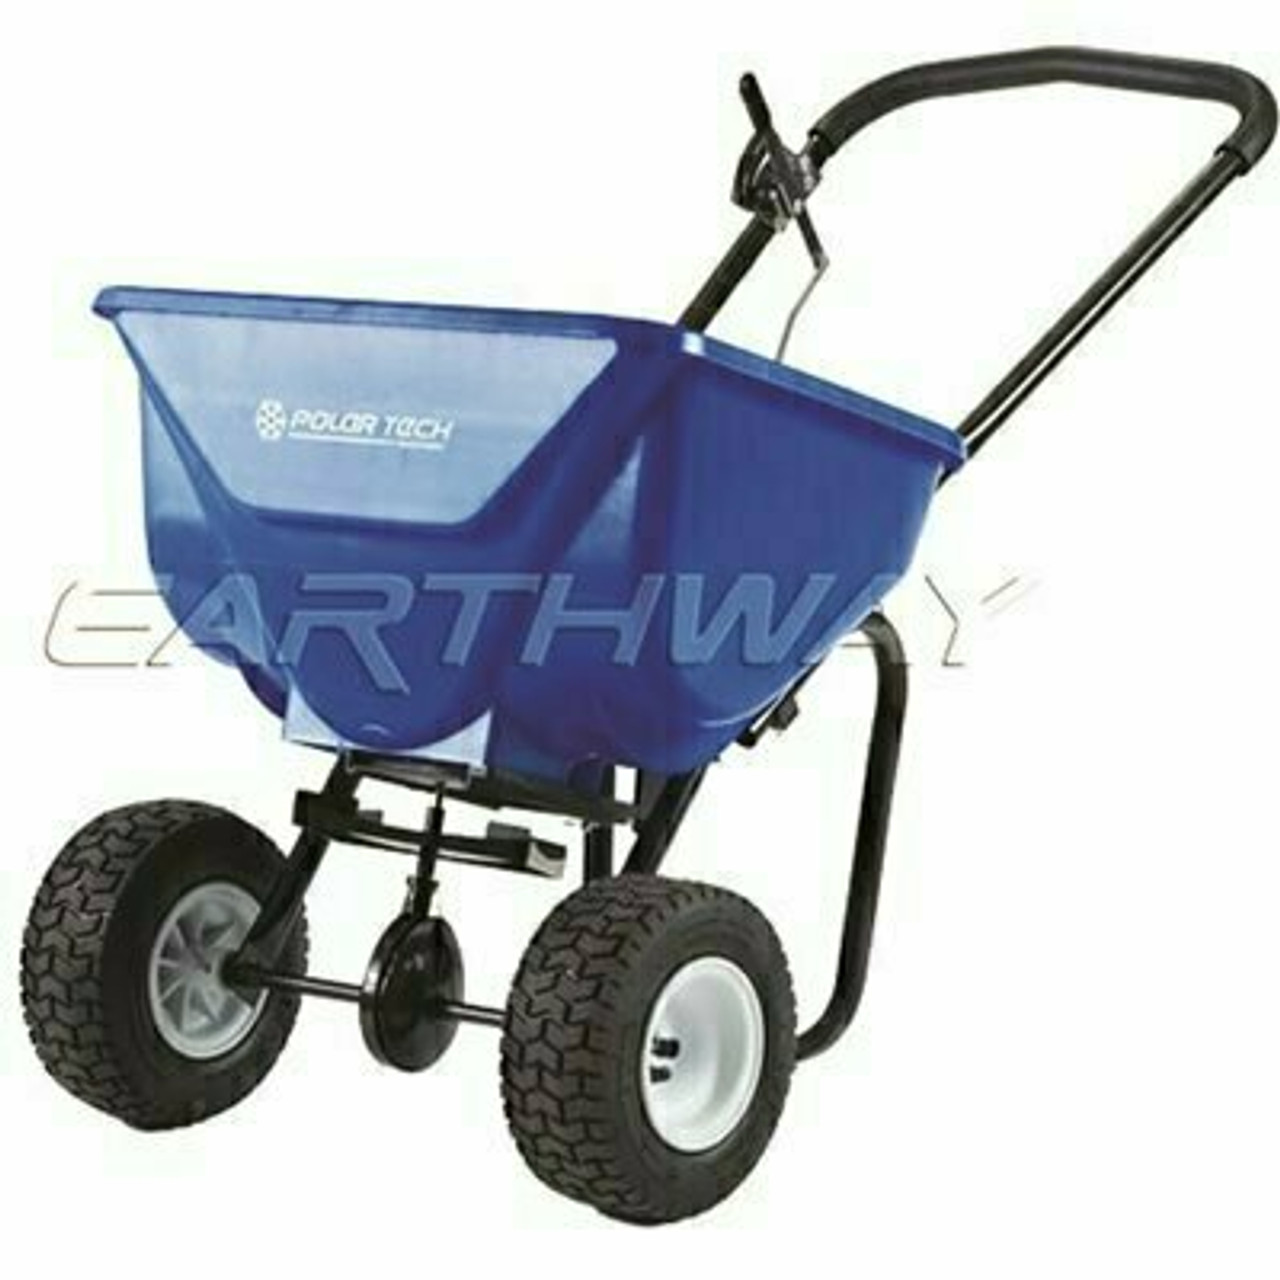 Earthway High Output Broadcast Spreader With Pneumatic Tires